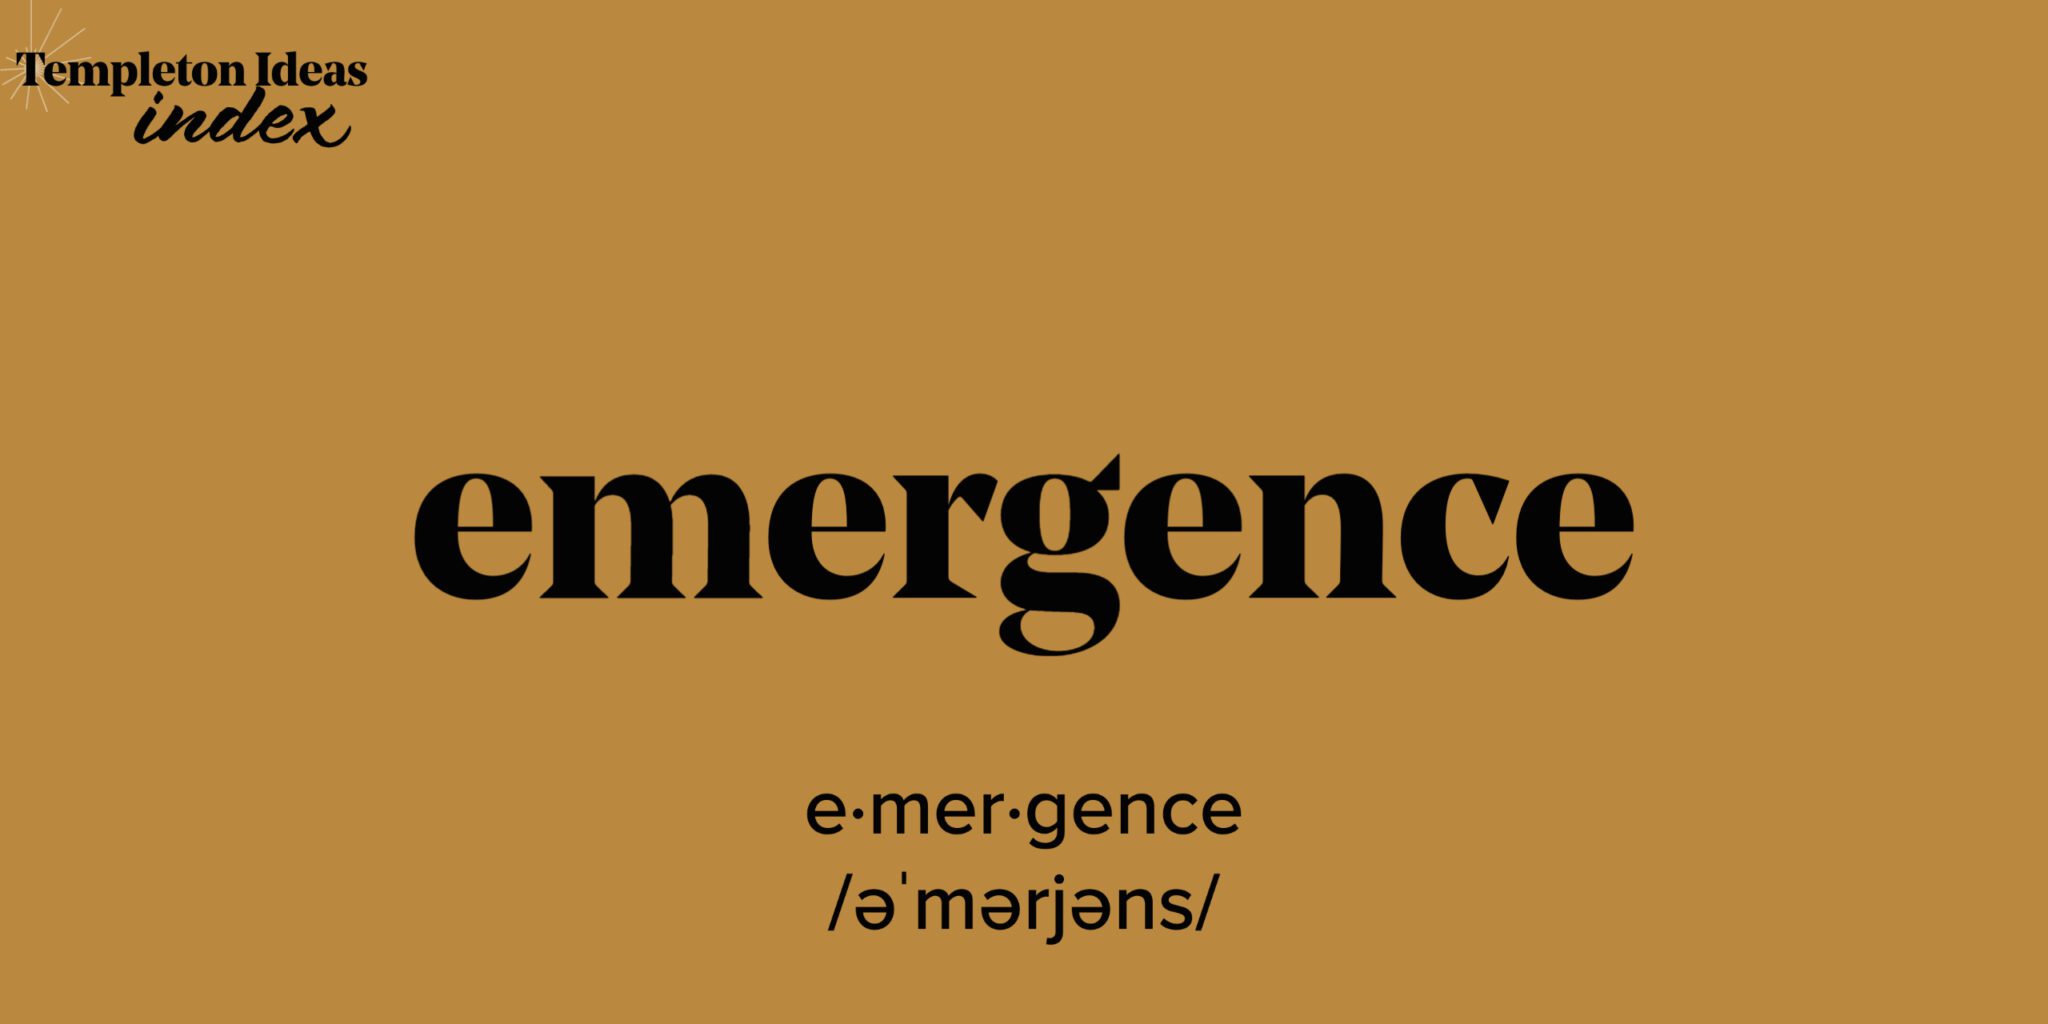 What Is Emergence?